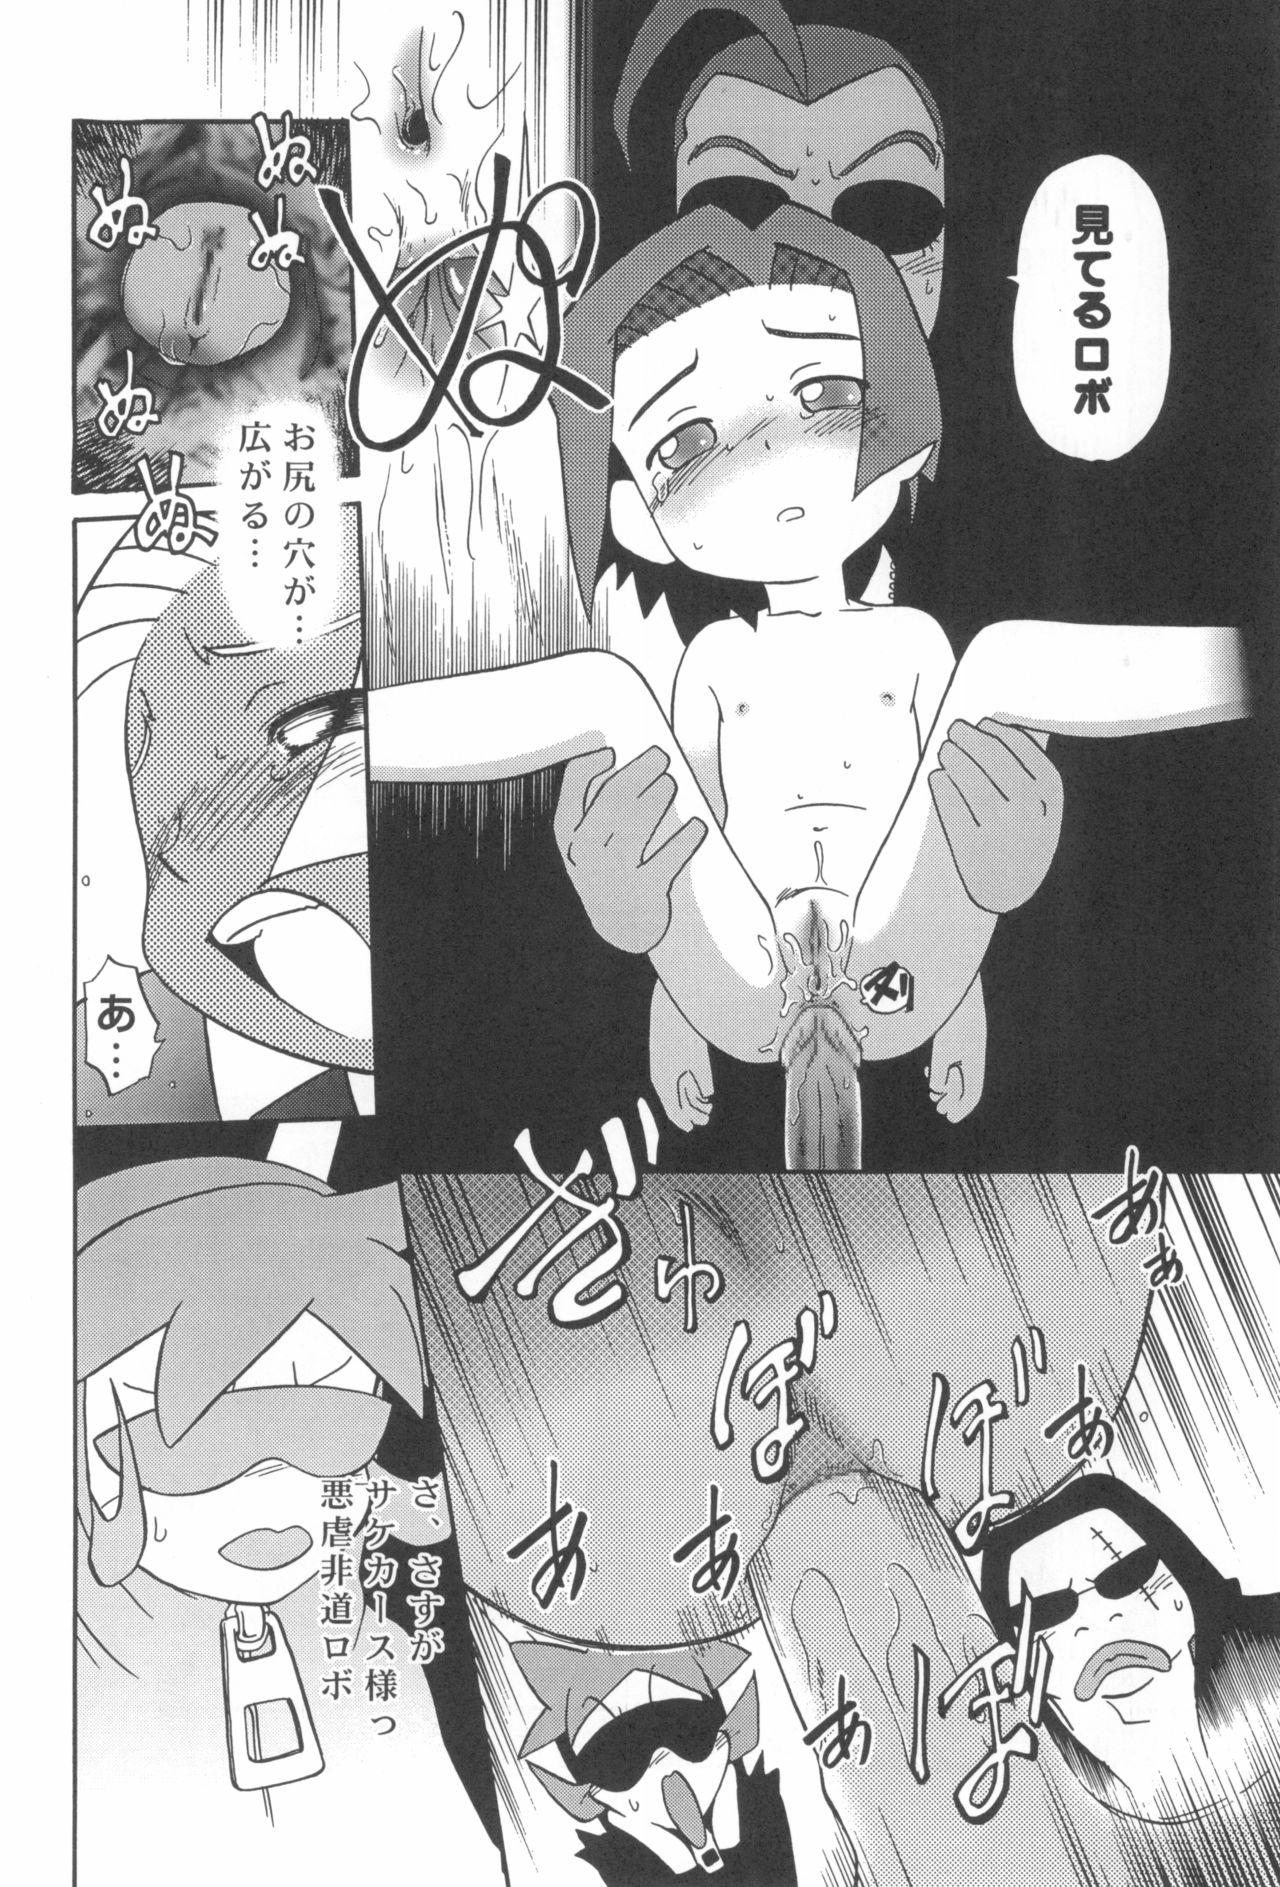 Amatures Gone Wild Dame Force!! - Medabots Thylinh - Page 12